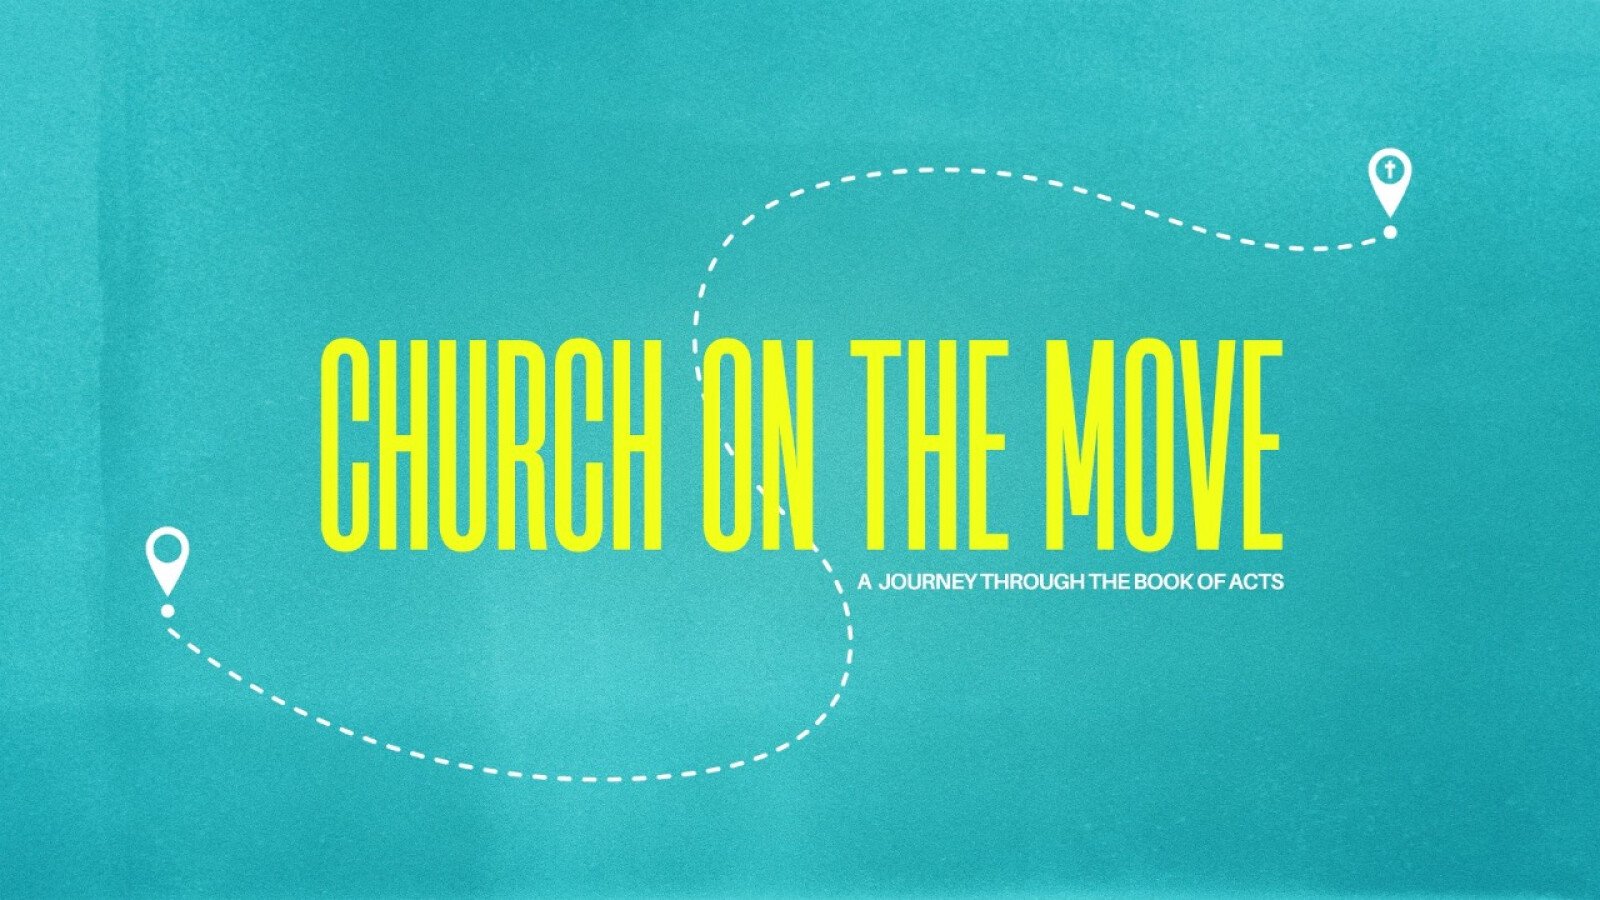 Church on the Move